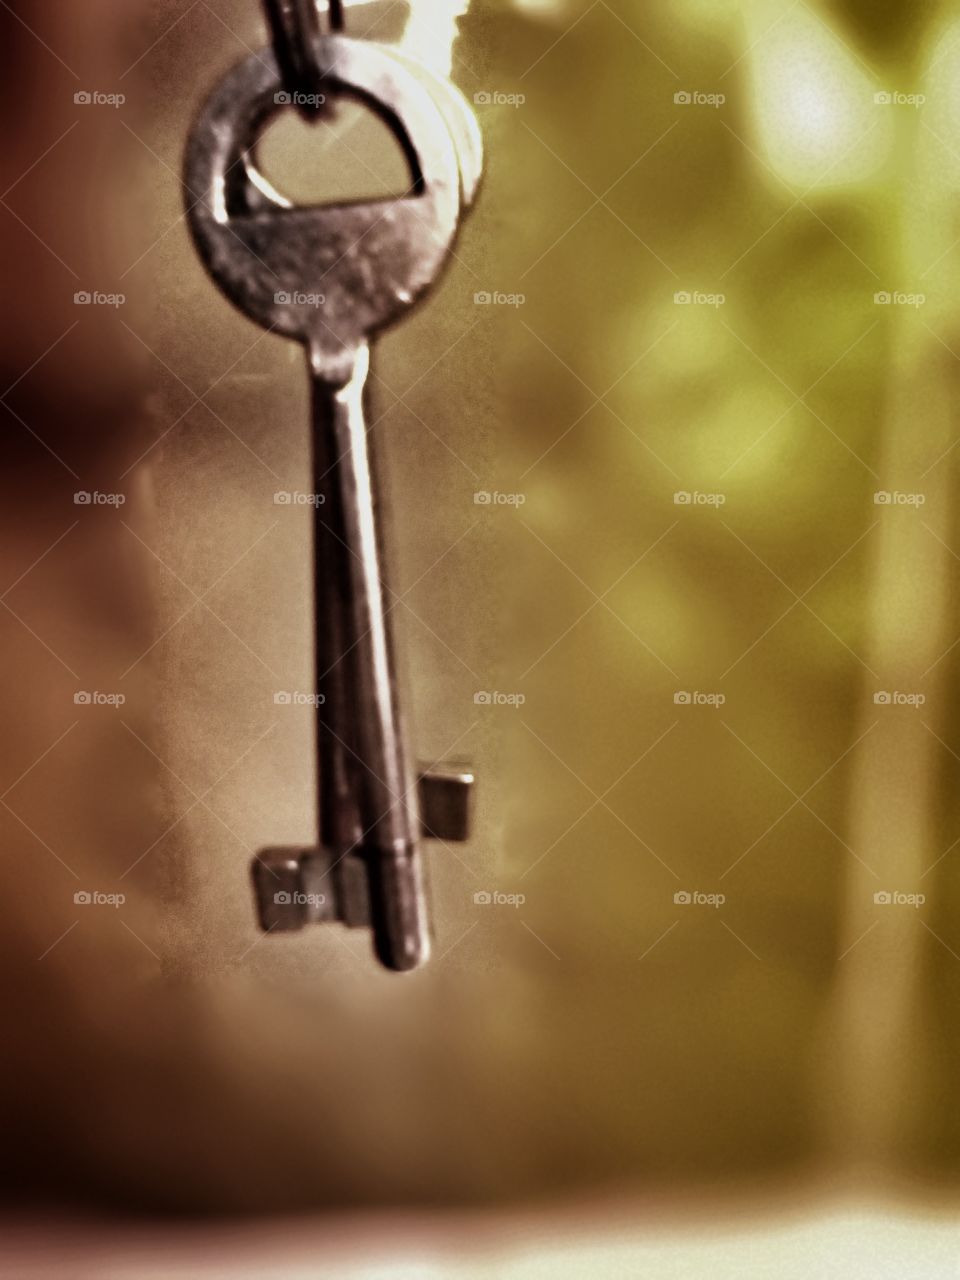 Keys. The picture is grim. Mysterious